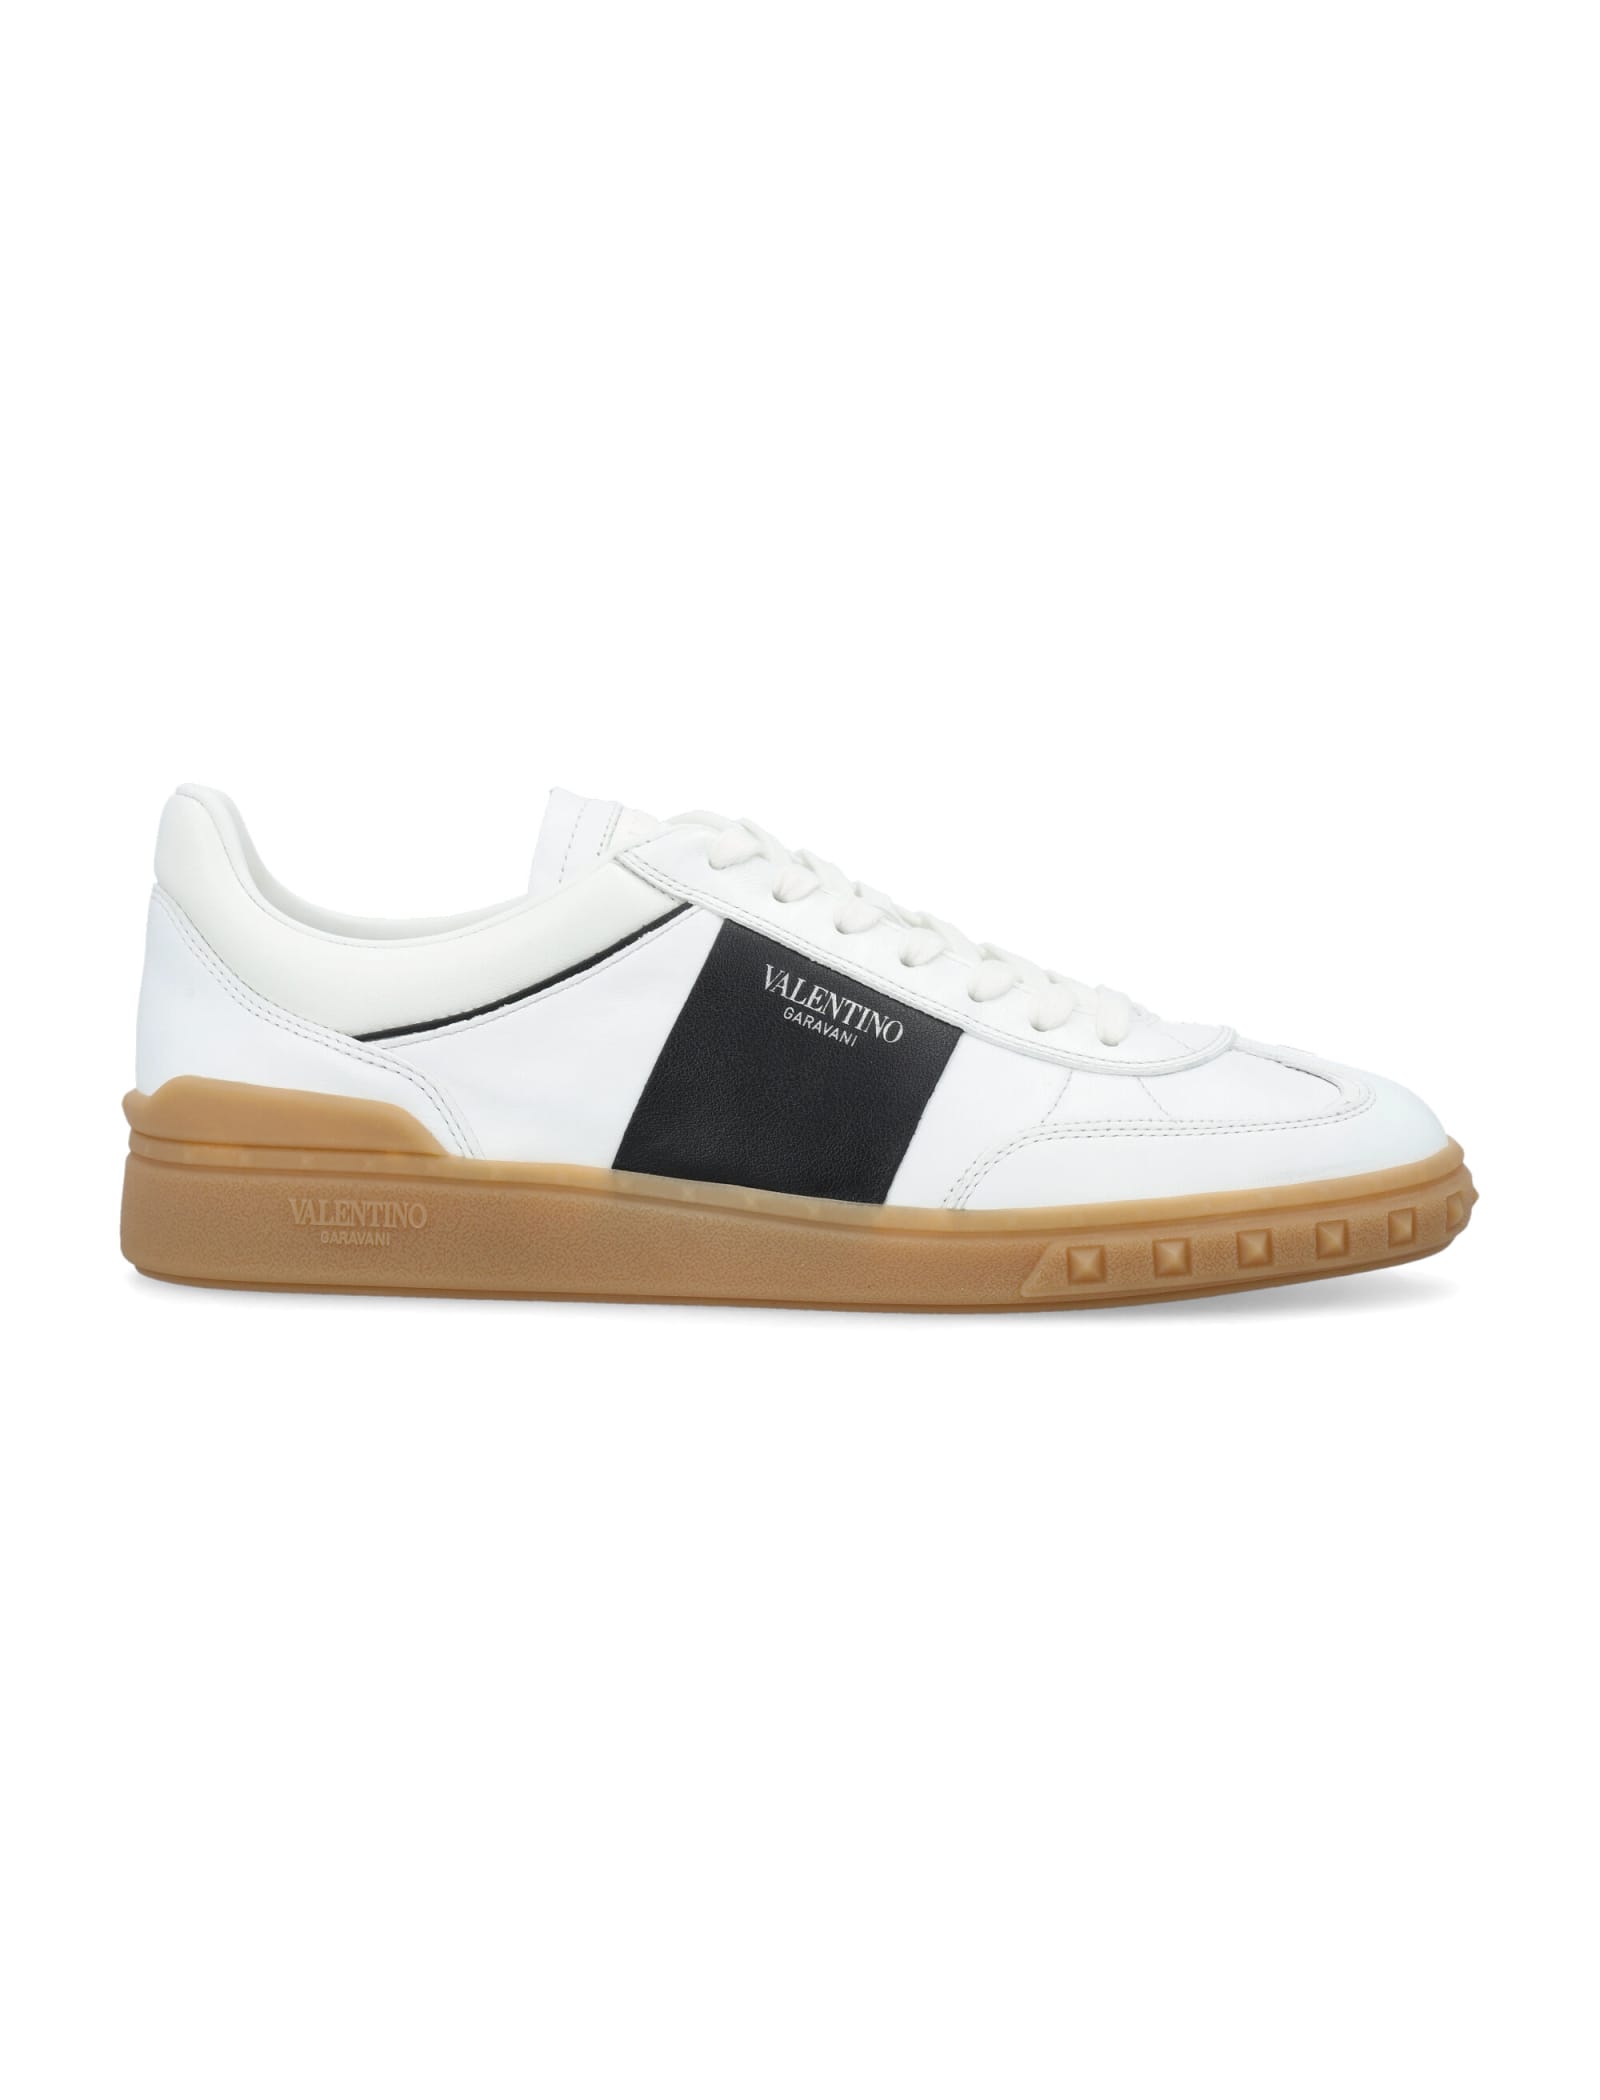 Shop Valentino Upbillage Low Top Sneakers In White/black